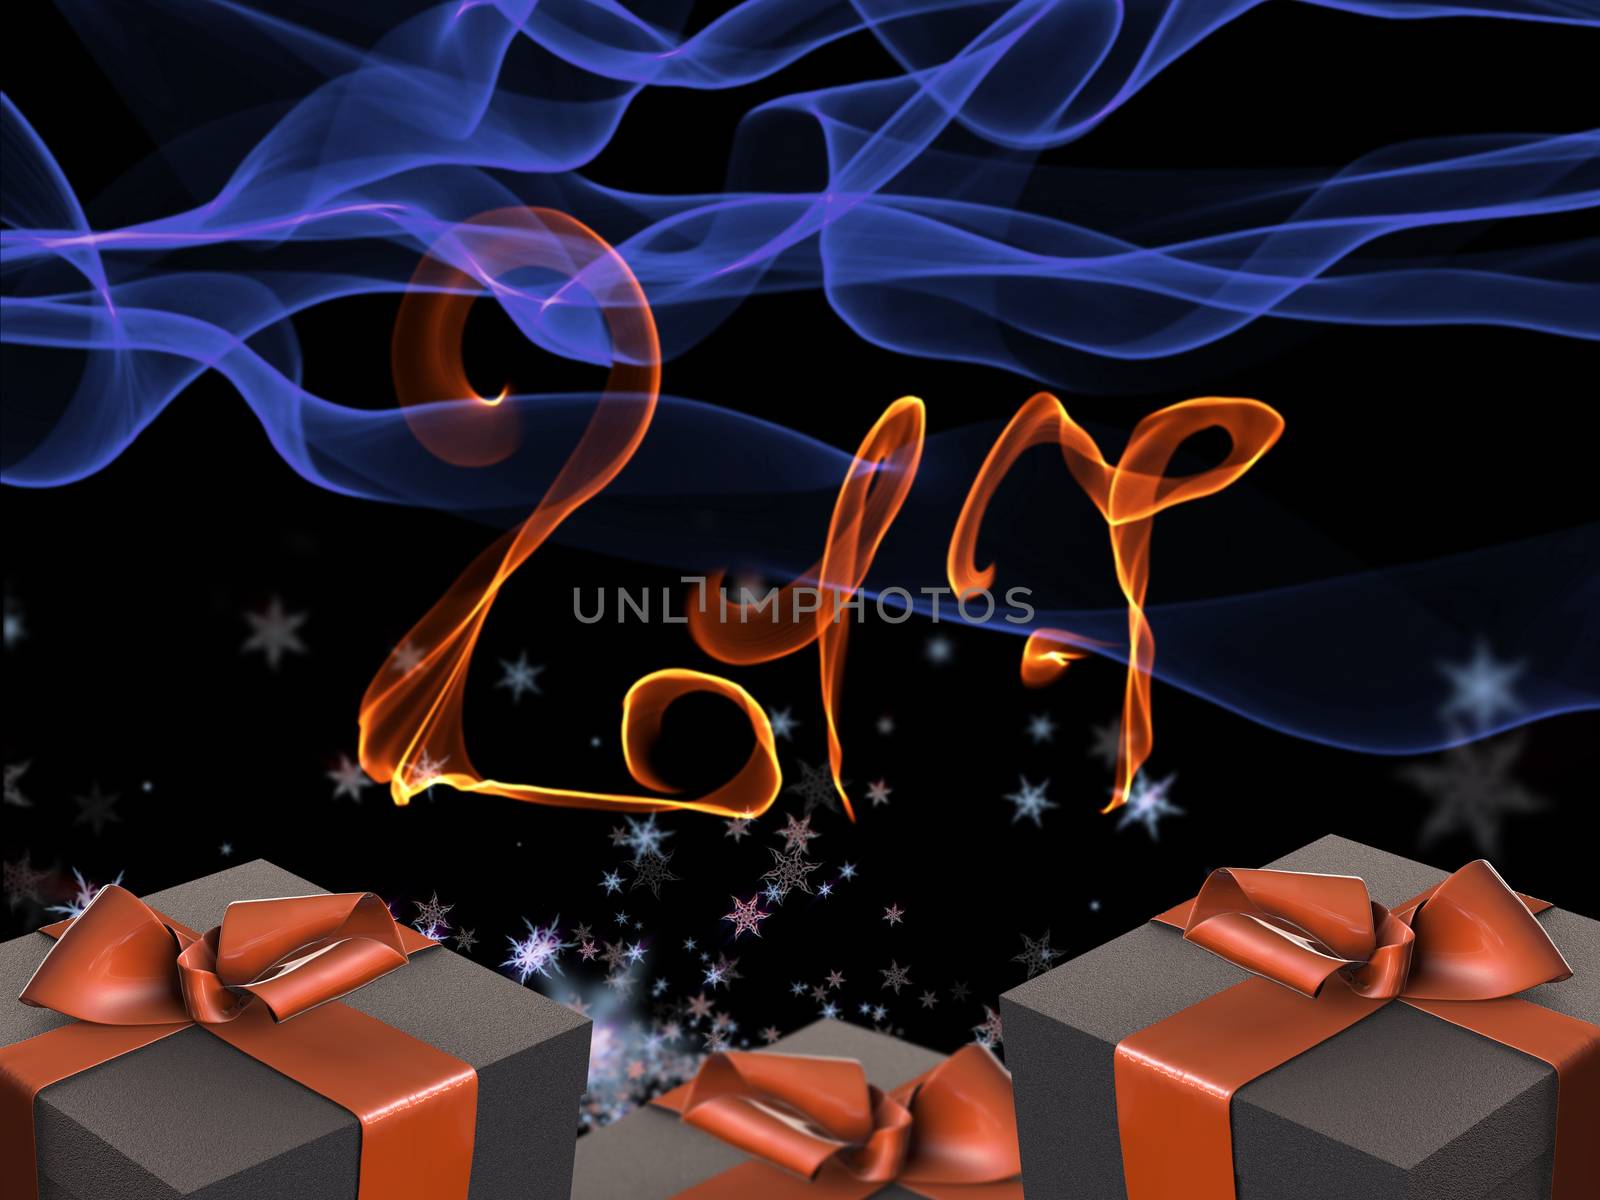 Colorful and striped boxes with gifts tied bows on dark abstract space background with 2017 letteing numbers written by fire. Happy new year 3d illustration.